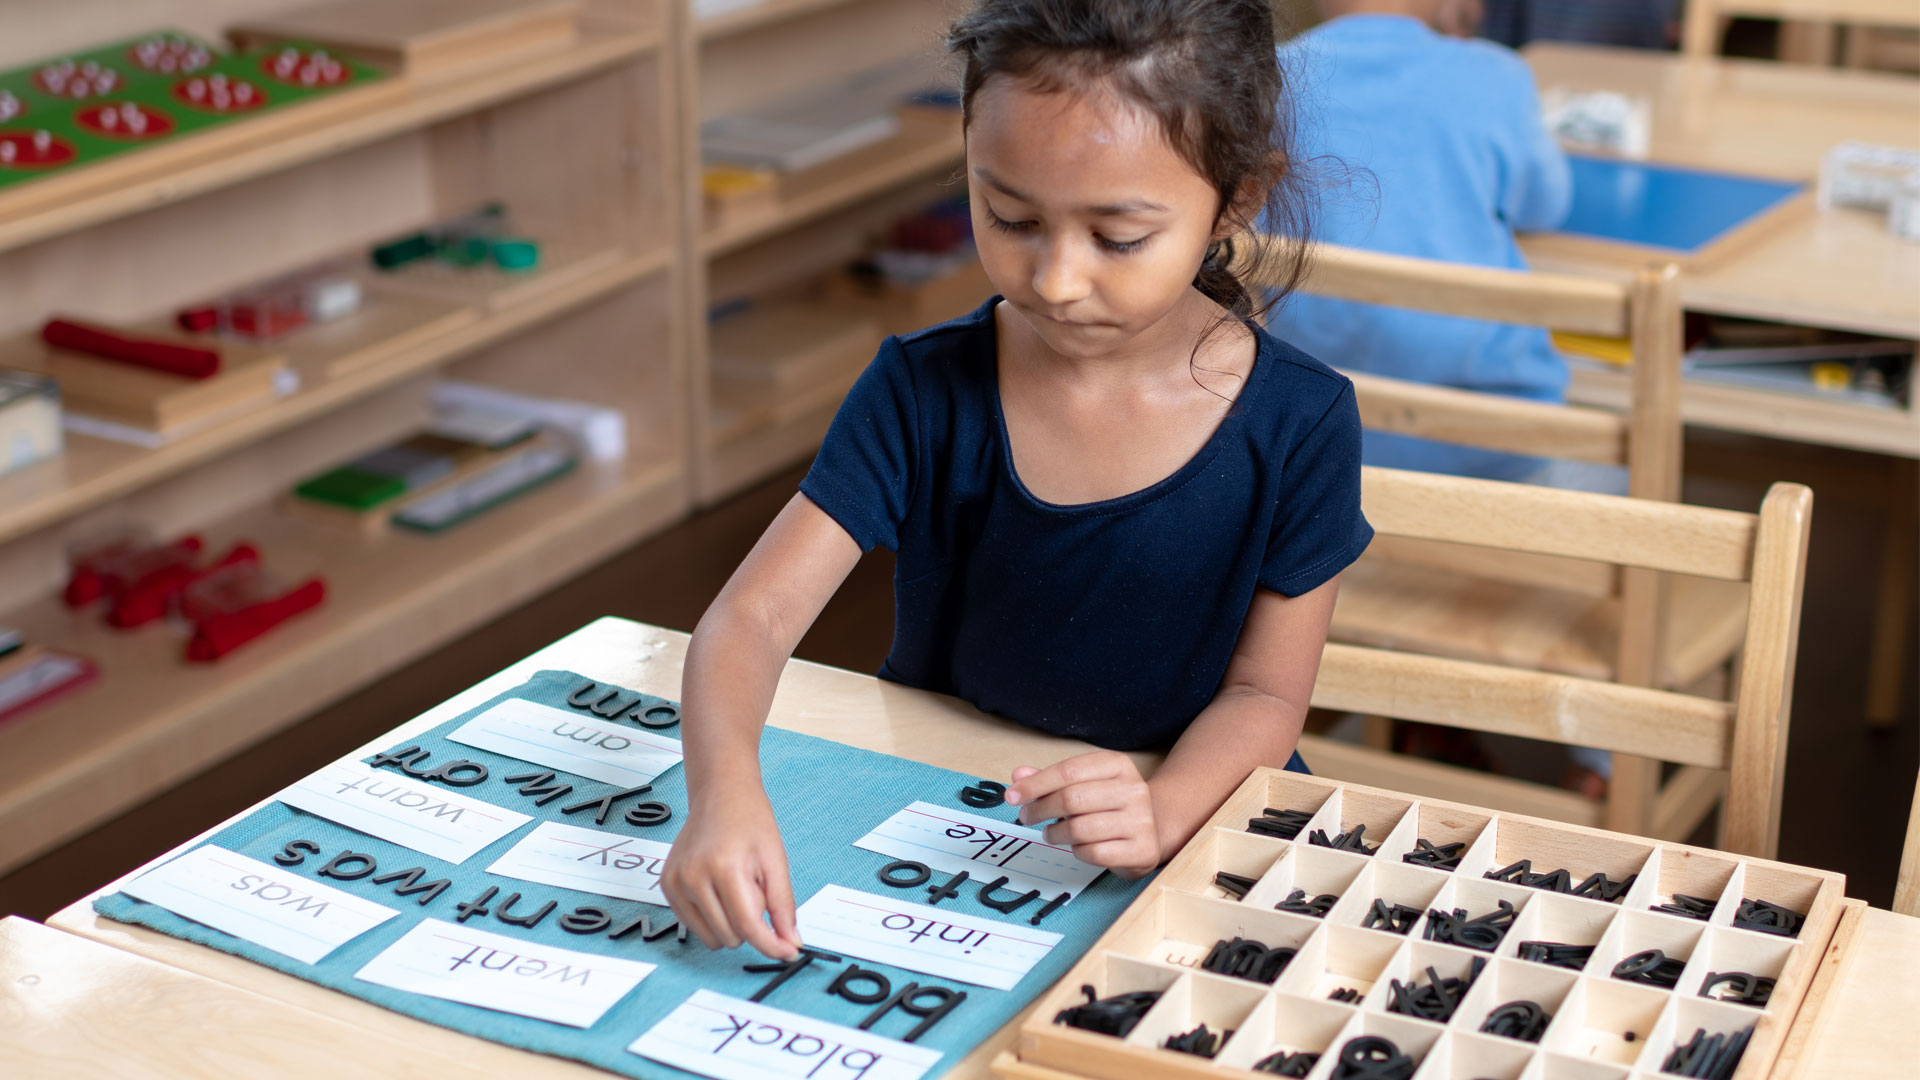 A girl sitting on a chair and learning how to spell with flashcards and toy letters